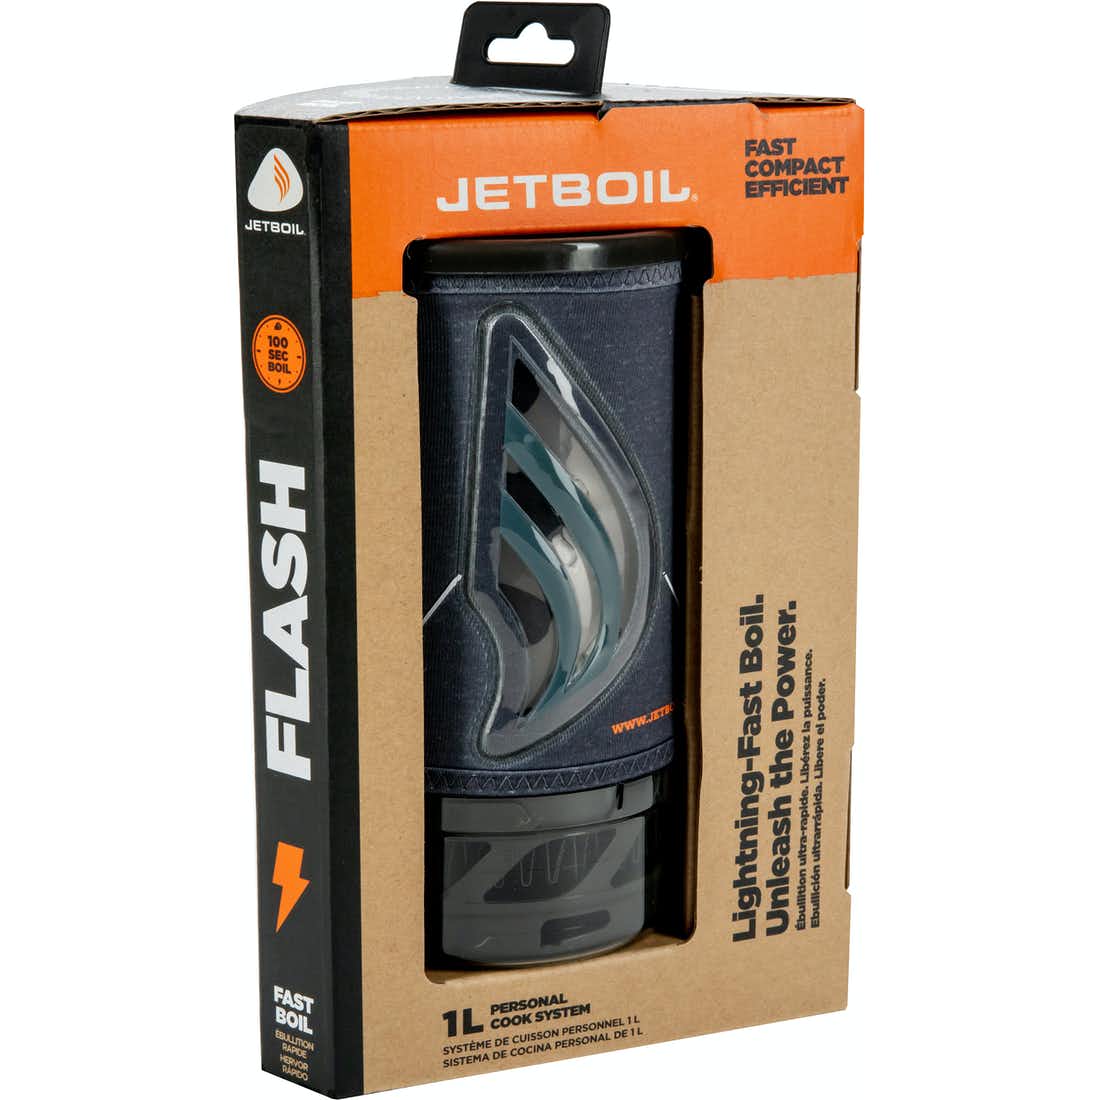 Jetboil flash cooking